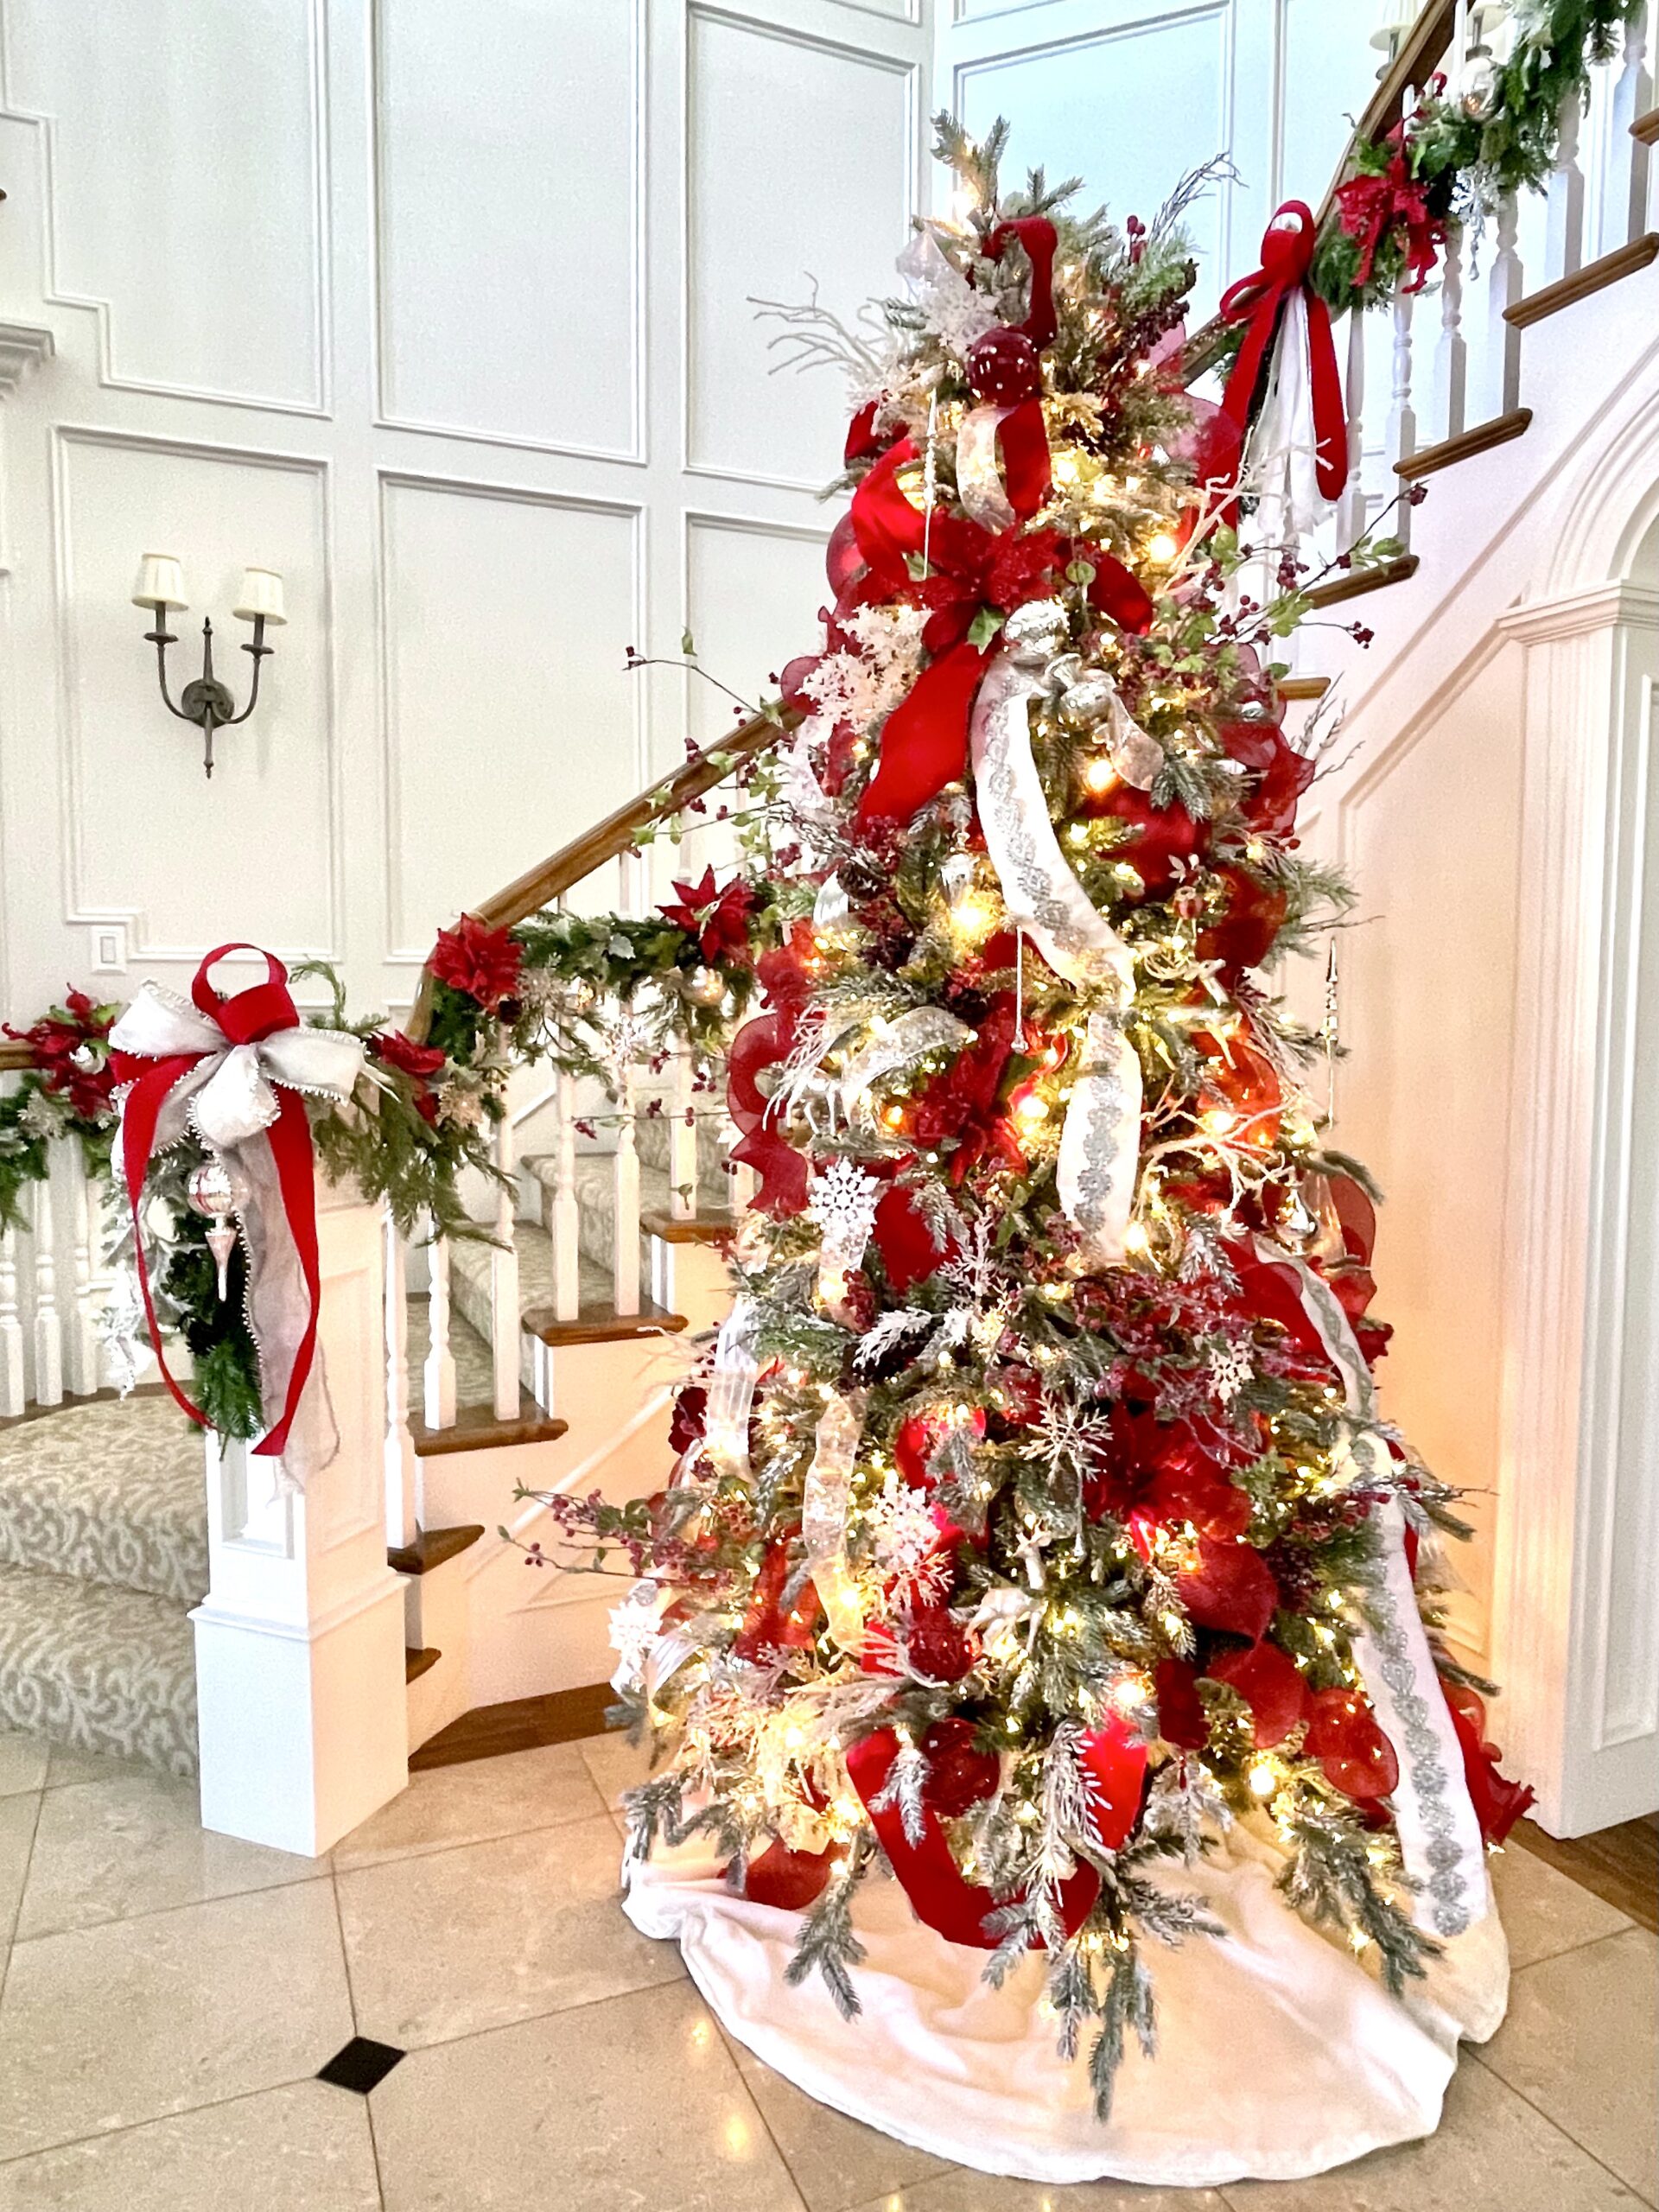 Red & Silver Christmas Tree in Entry Hall with